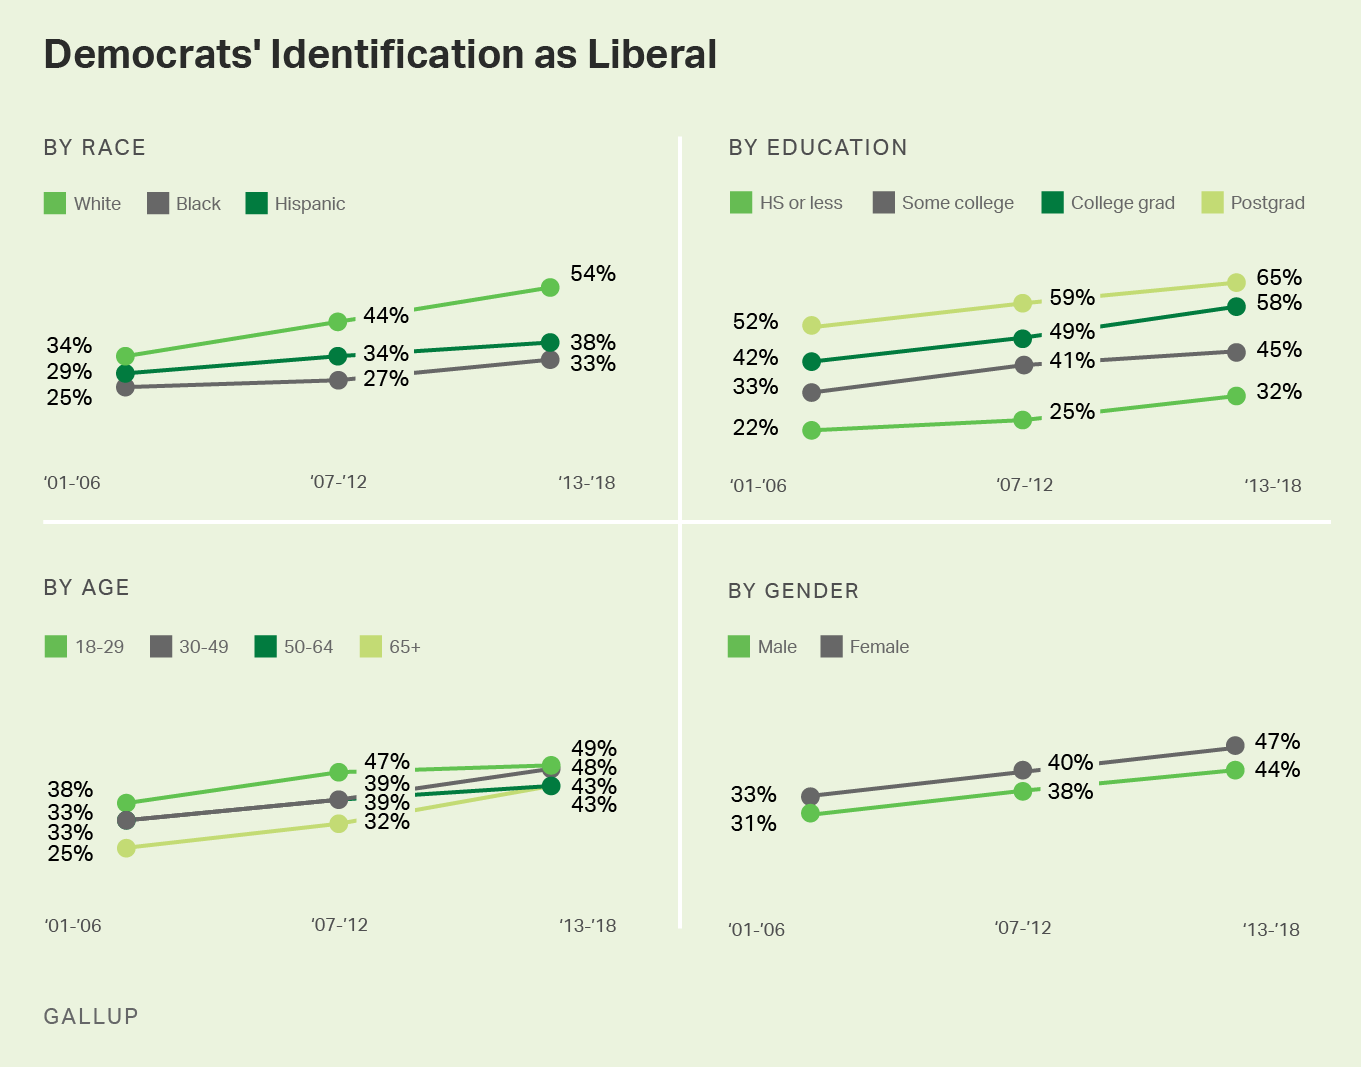 Small multiple graphs. A series of graphs depicting changes in Democrats identifying as liberal by key demographic group.